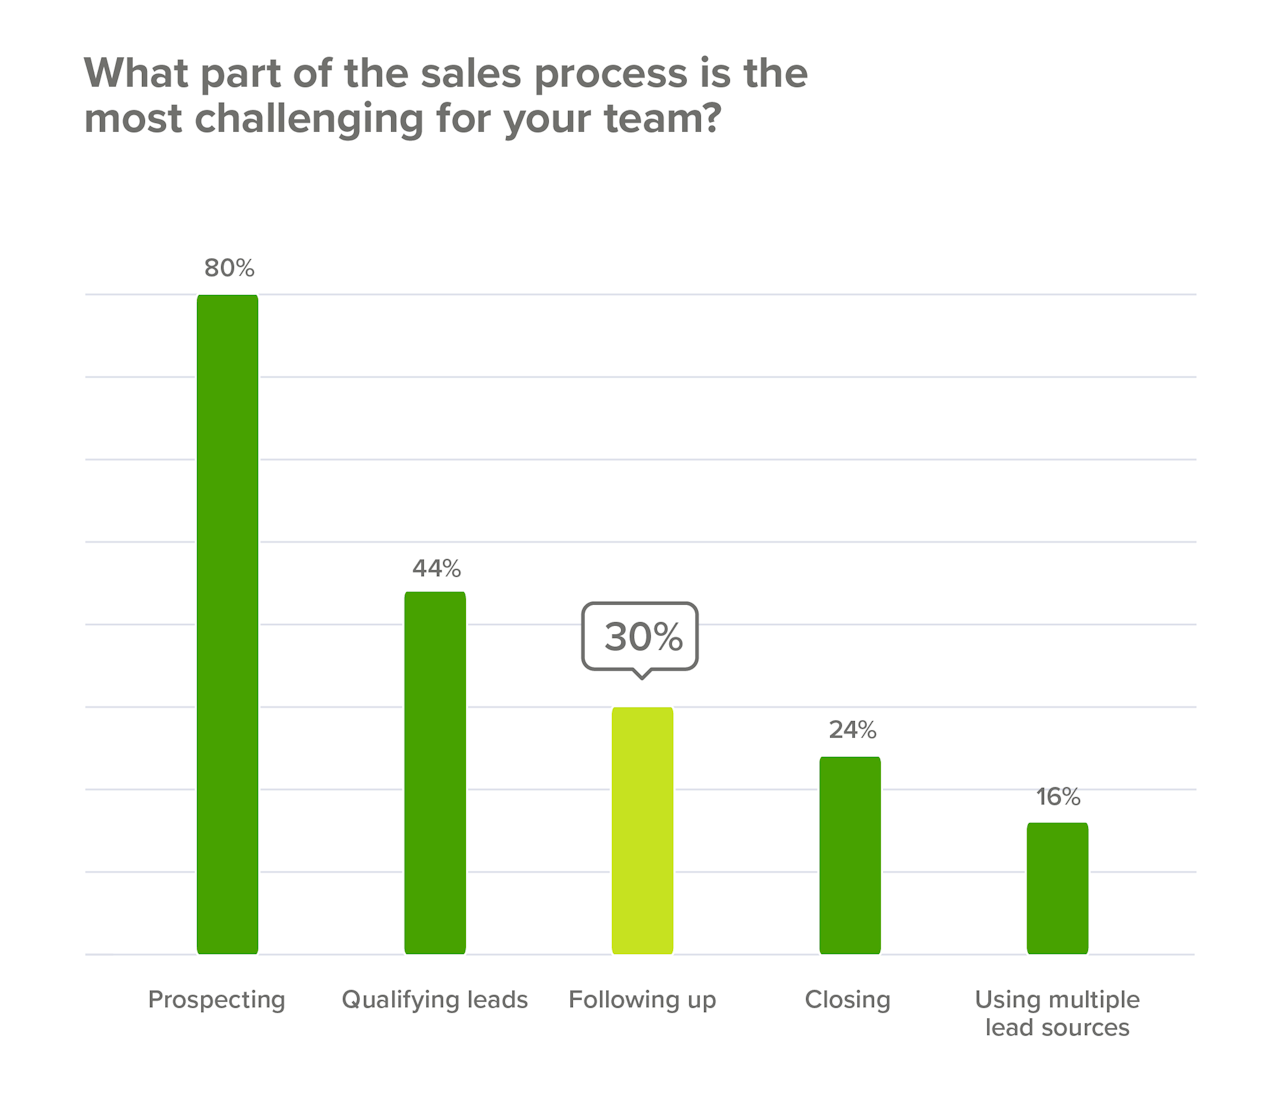 Closing the deal is the fourth most difficult part of the sales process.